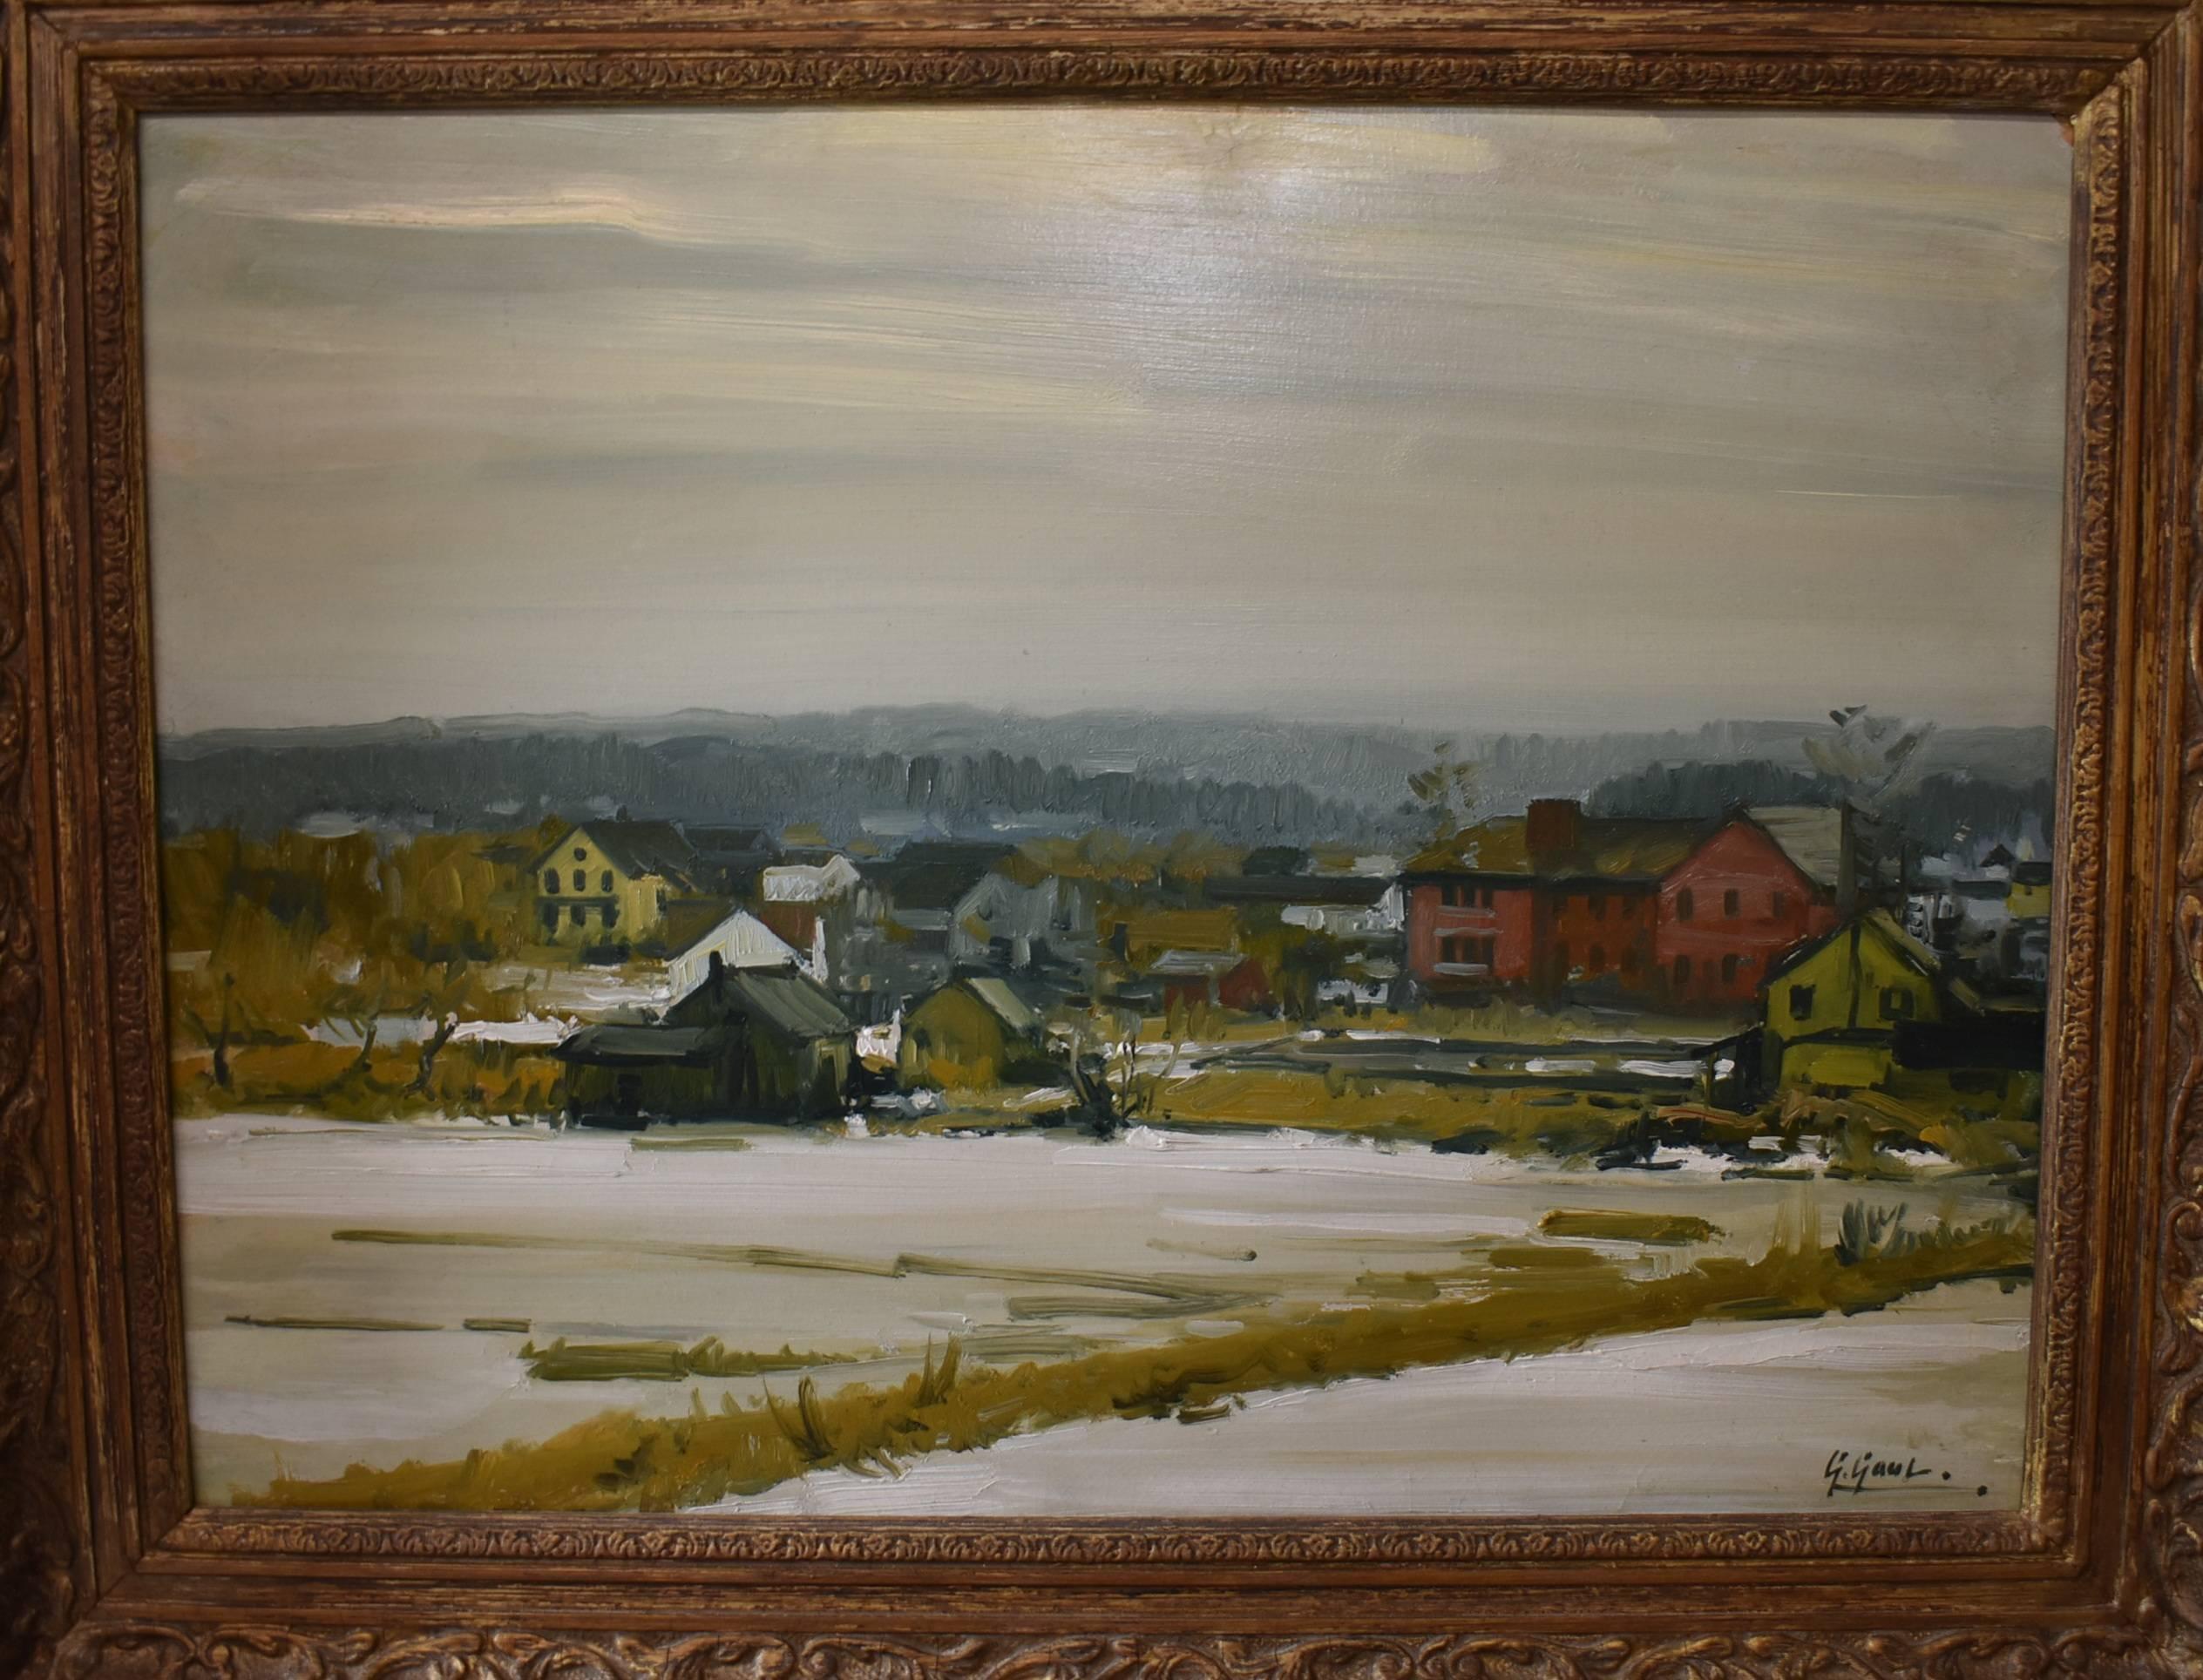 A beautiful impressionistic oil painting on board by Gilbert Gaul (1855-1919). Great color and nice technique. Signed by artist lower right. Framed in an ornate gold frame with title 